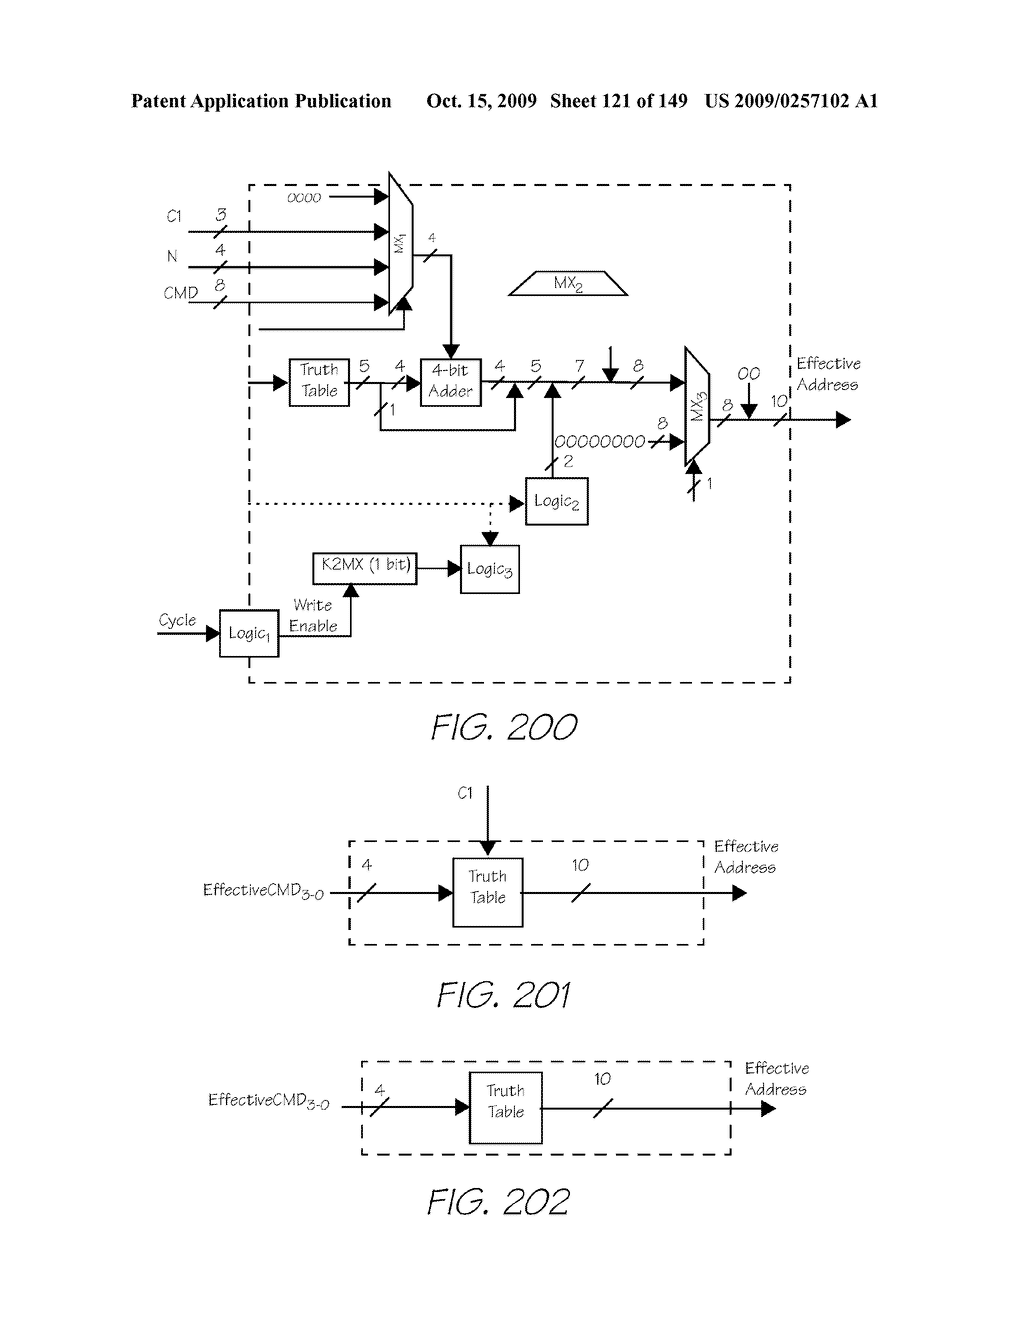 IMAGE PROCESSING APPARATUS HAVING CARD READER FOR APPLYING EFFECTS STORED ON A CARD TO A STORED IMAGE - diagram, schematic, and image 122